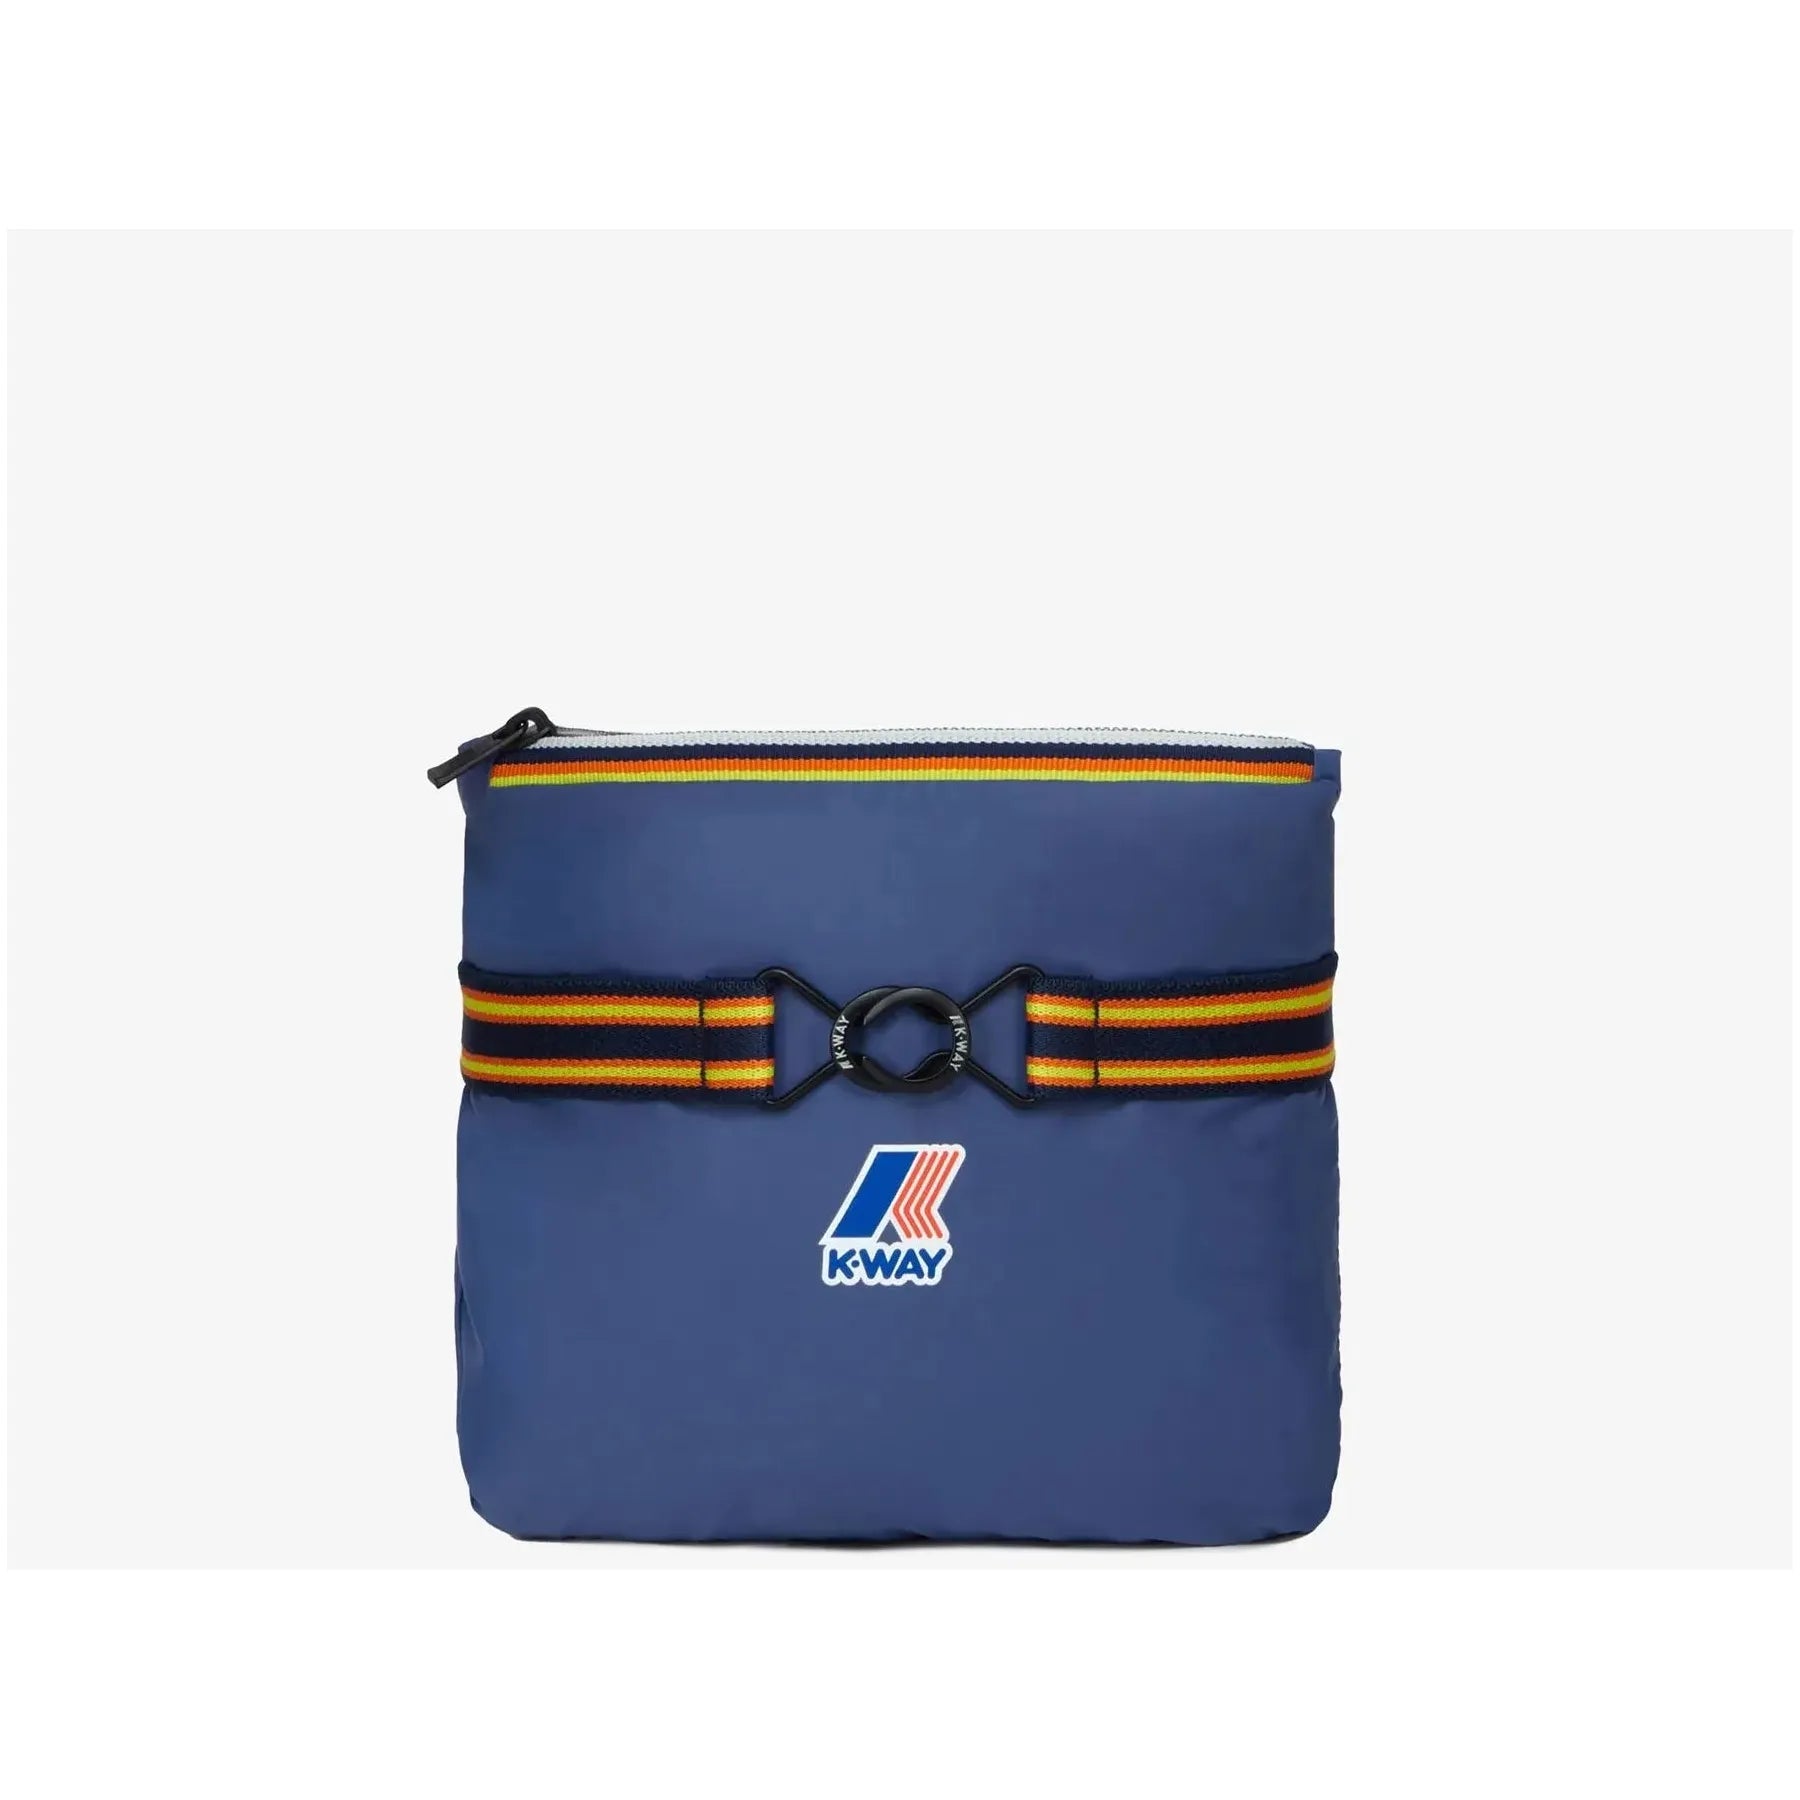 Blue K-Way Le Vrai 3.0 Claude shoulder bag with a striped strap and logo, featuring a black zipper and a circular buckle on a white background. This water-repellent bag is ideal for any weather conditions.